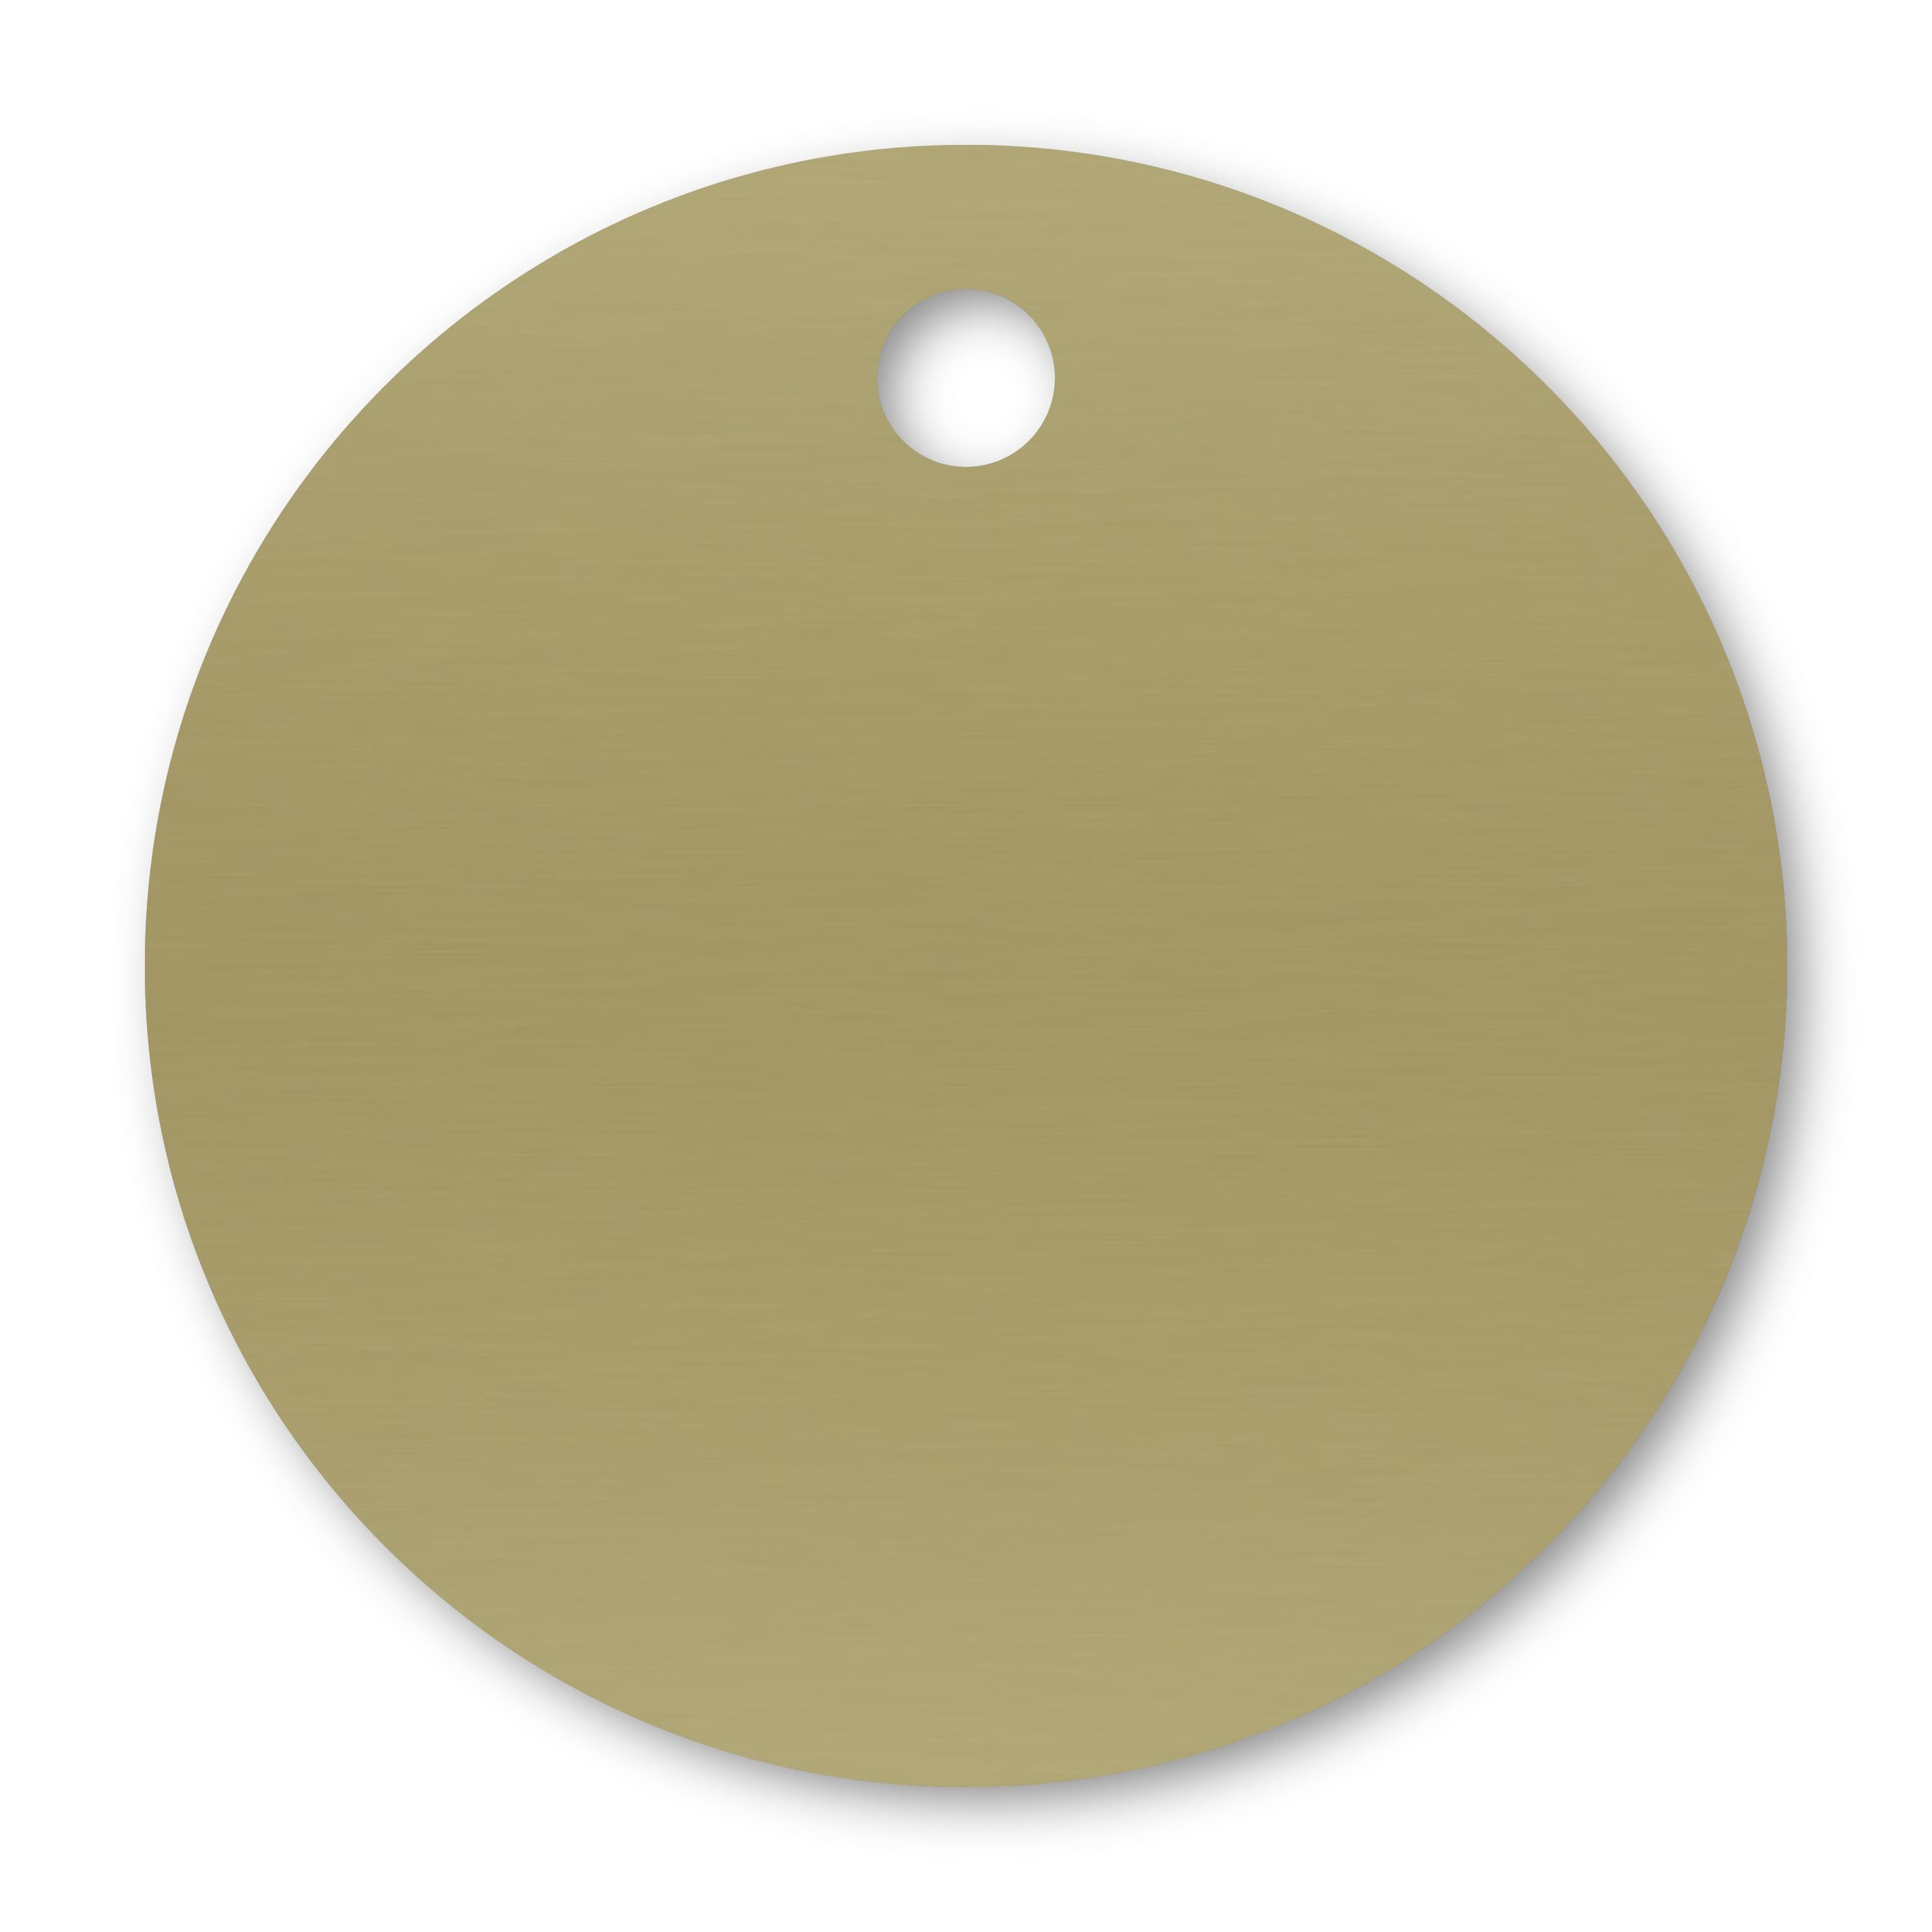 Anodized Aluminum Round Tags, 1-1/2" with 1/8" Hole, Laser Engraved Metal Tags Craftworks NW Gold 